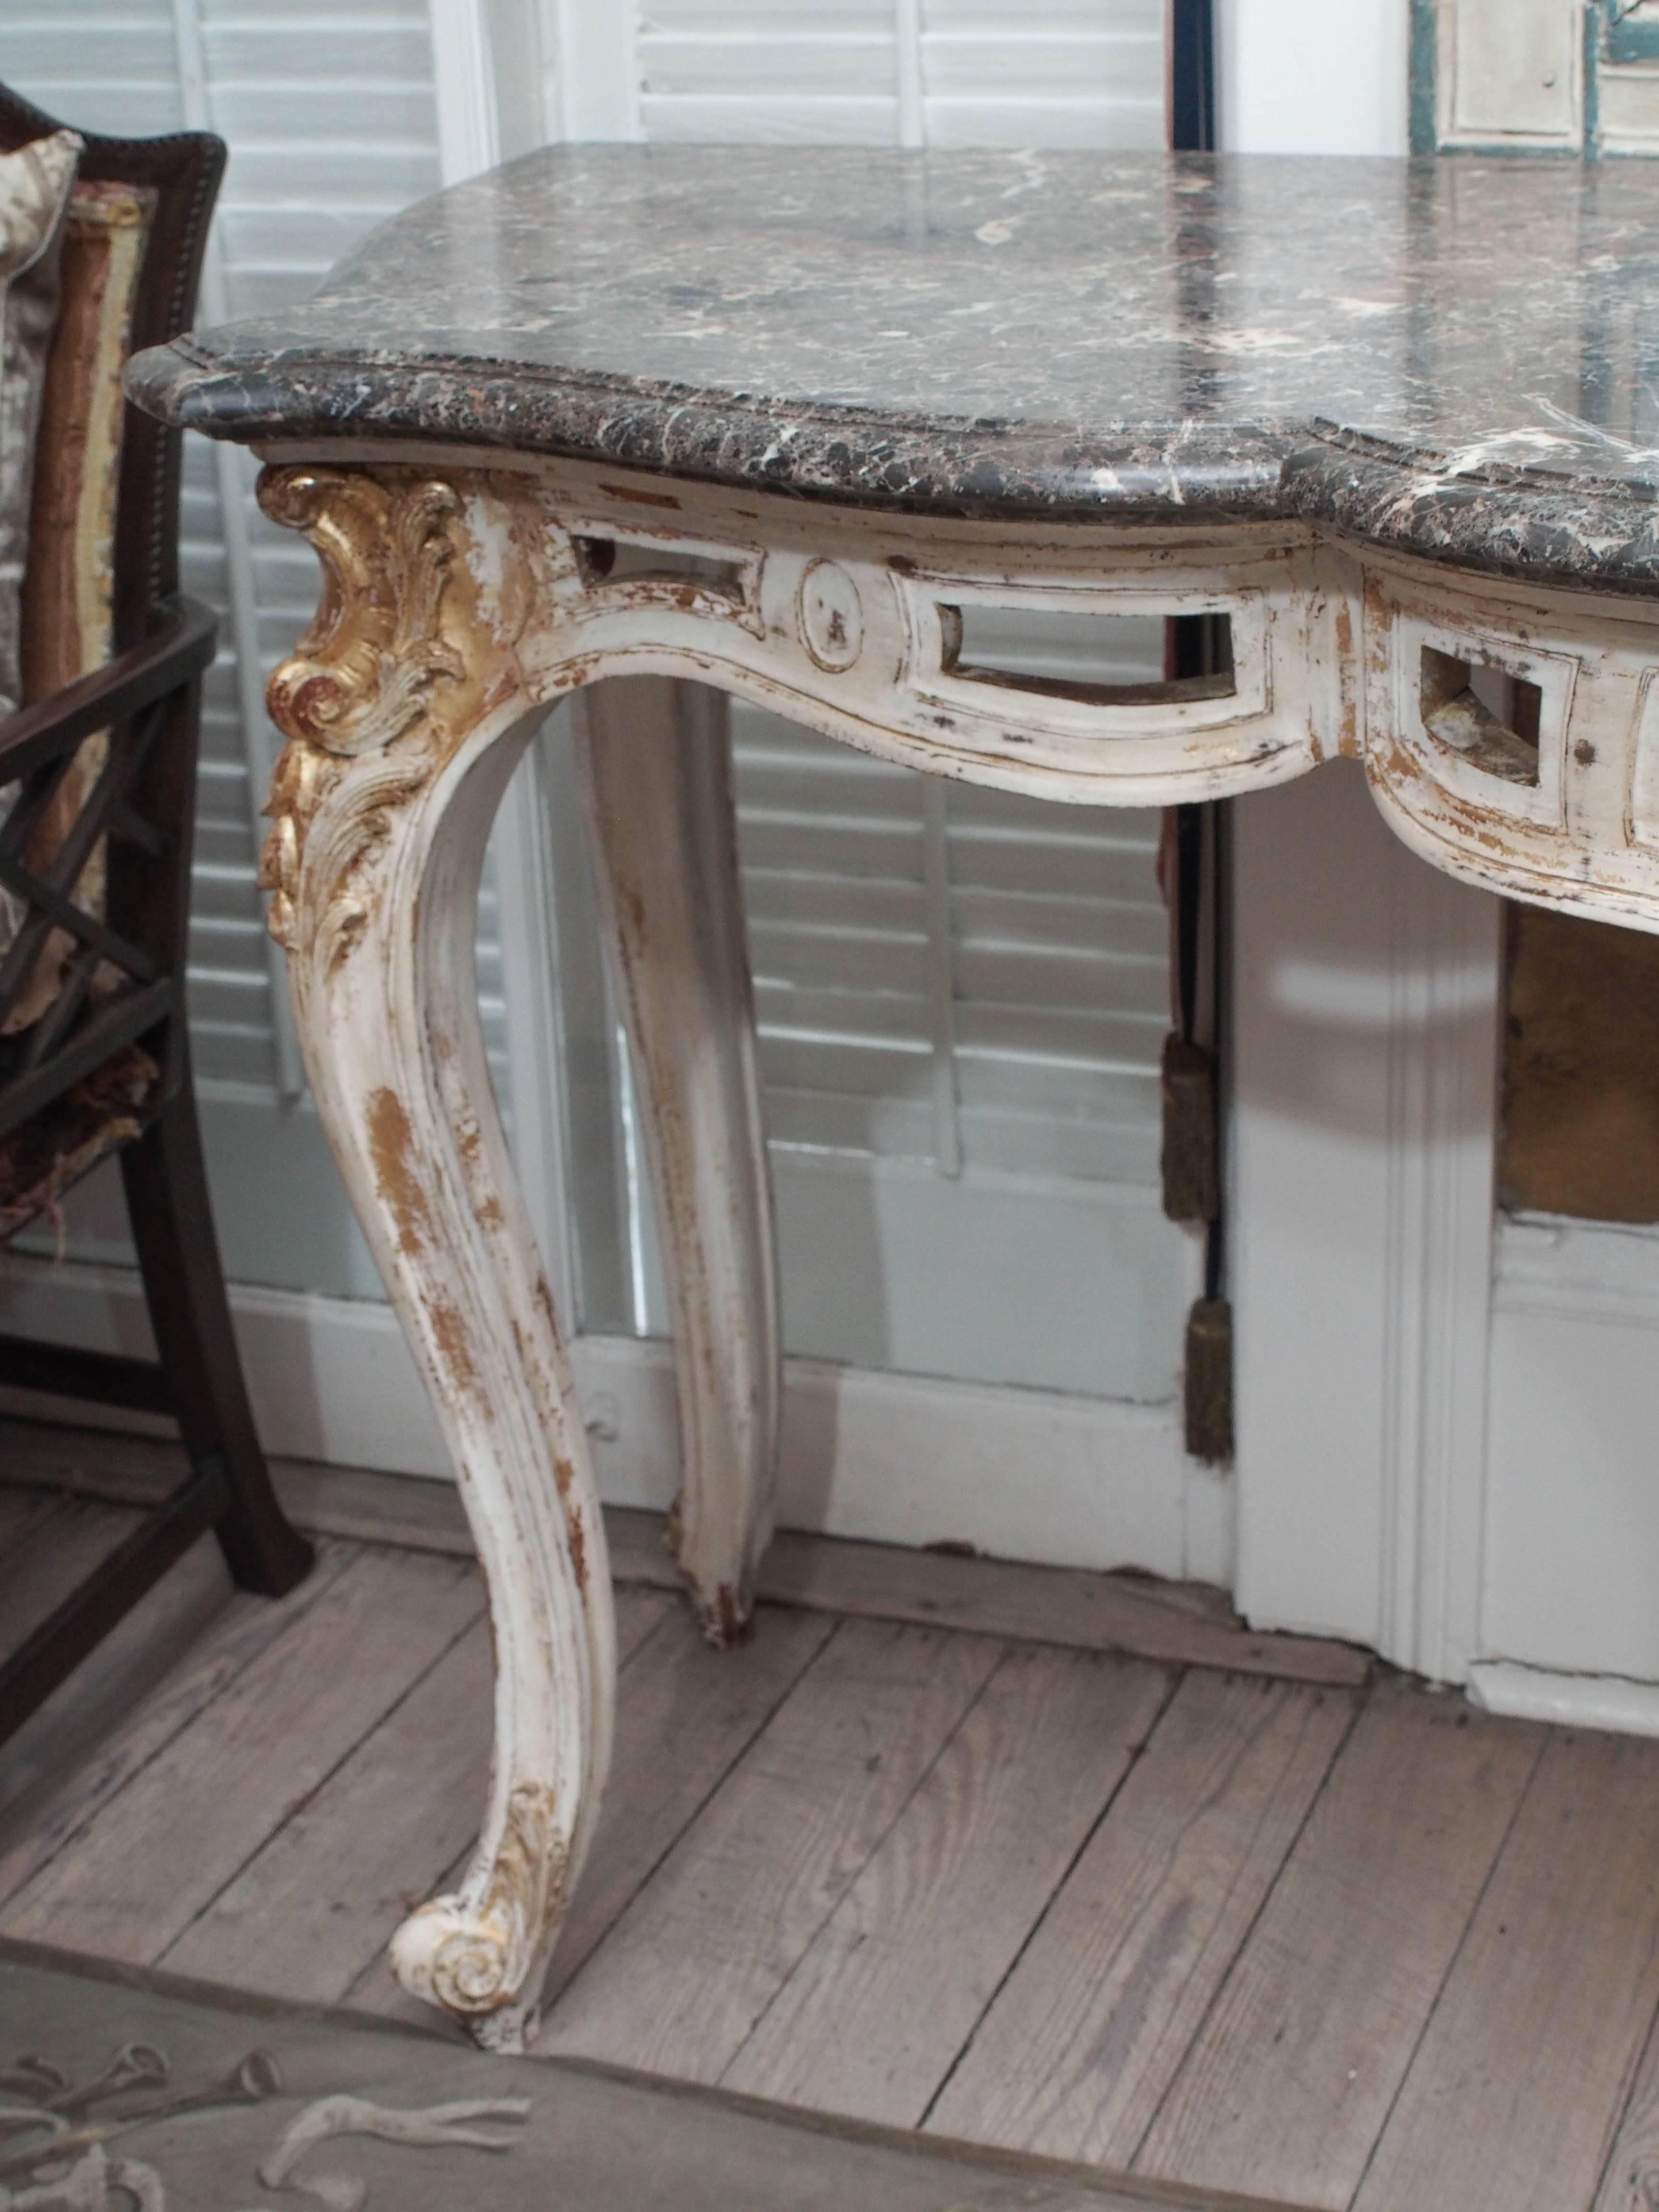 Regence style 18th century French console. Beautifully carved cabriole legs with whorl feet. Carved and painted front apron with a scallop shell design and carved trellis on the legs. Beveled black and white marble top.